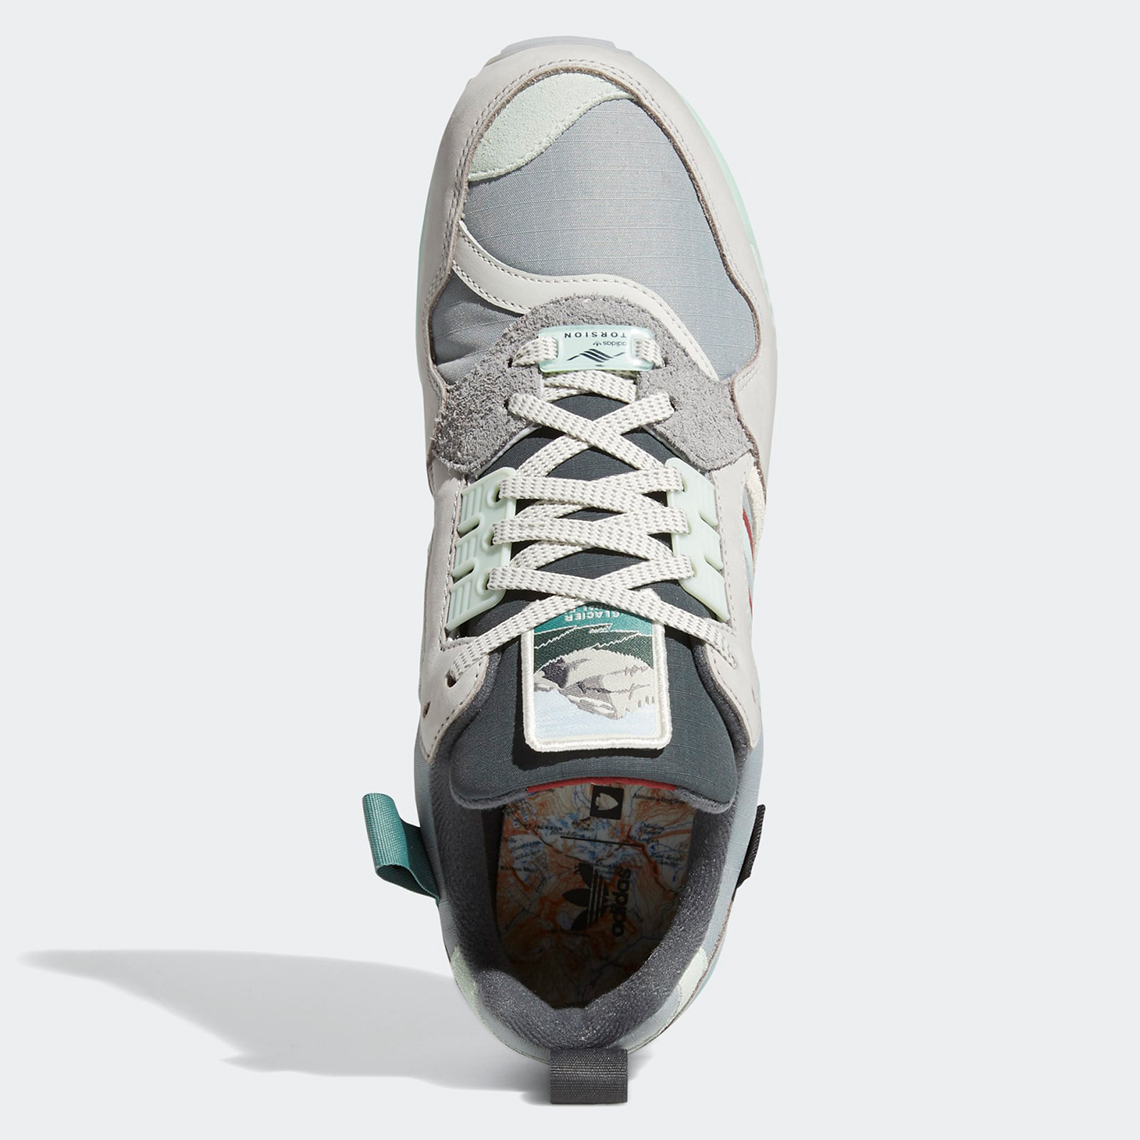 National Parks Foundation Adidas Zx 9000 Fy5172 1